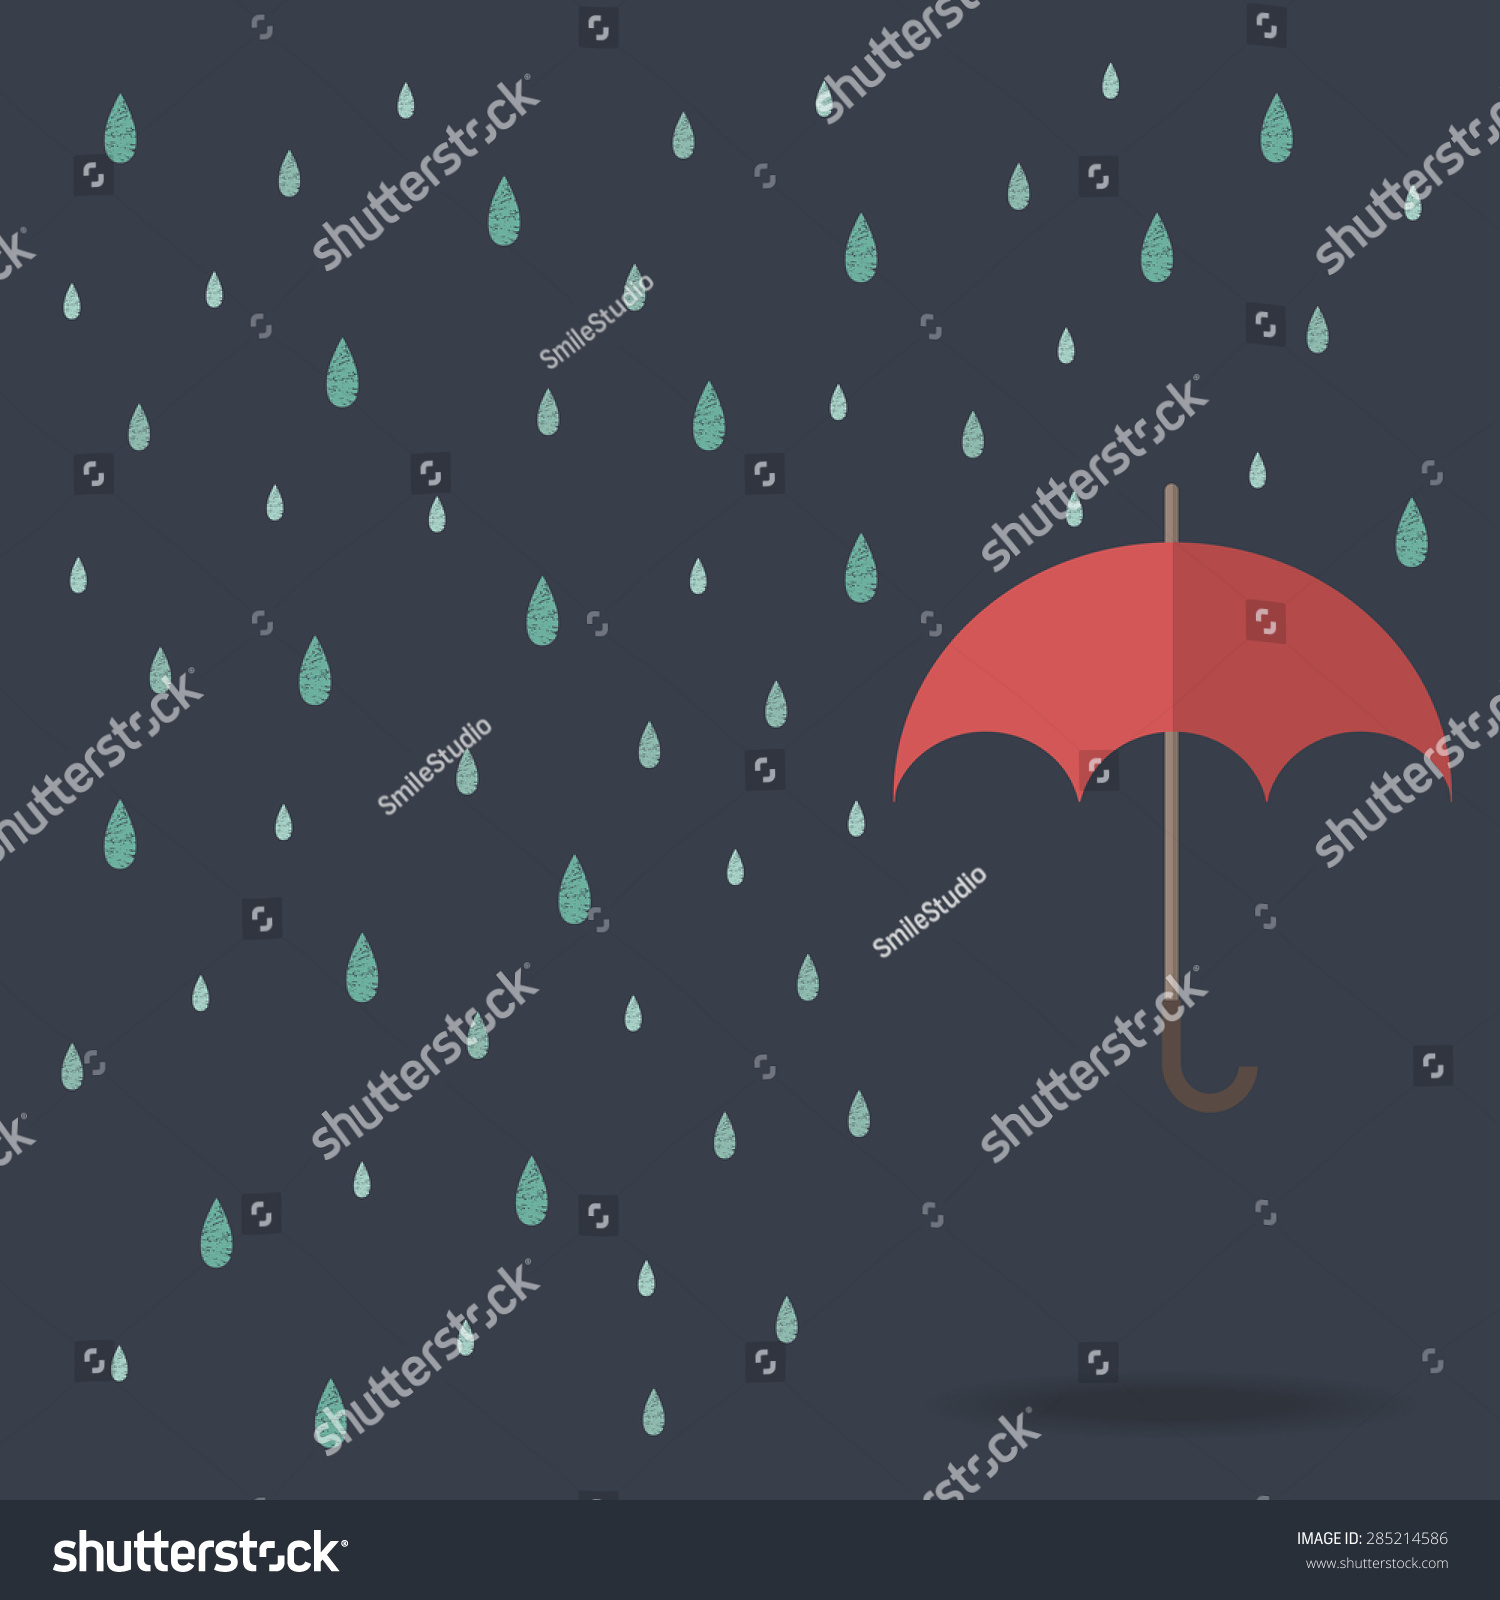 Raindrop Background With Red Umbrella Stock Vector Illustration ...